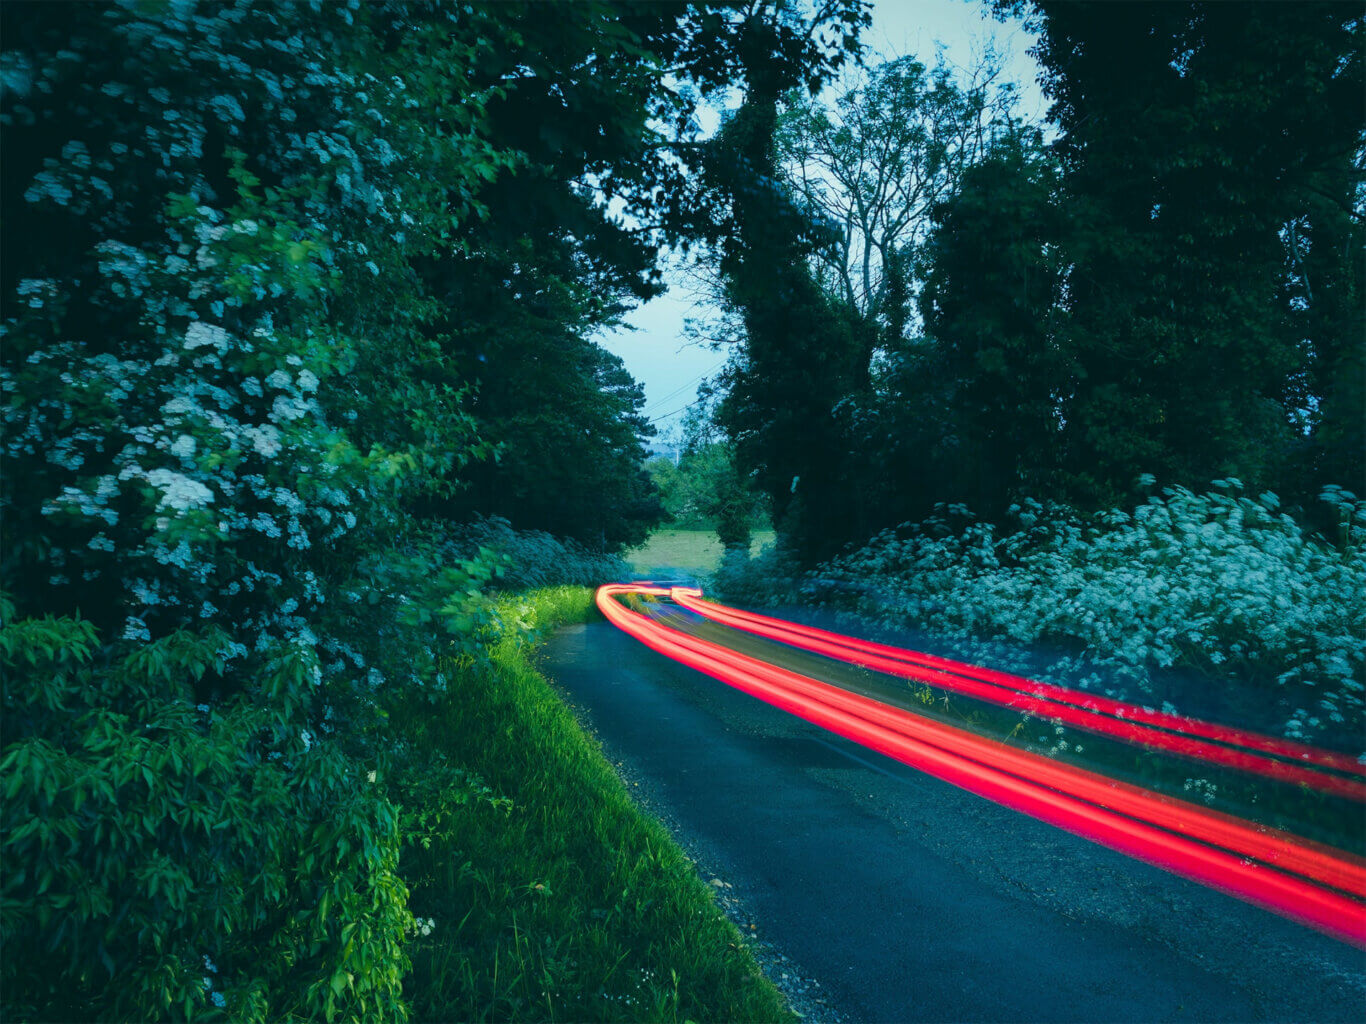 Long-exposure photo of a country road at dusk, surrounded by greenery and flowers, with the red tail lights from cars above the road.